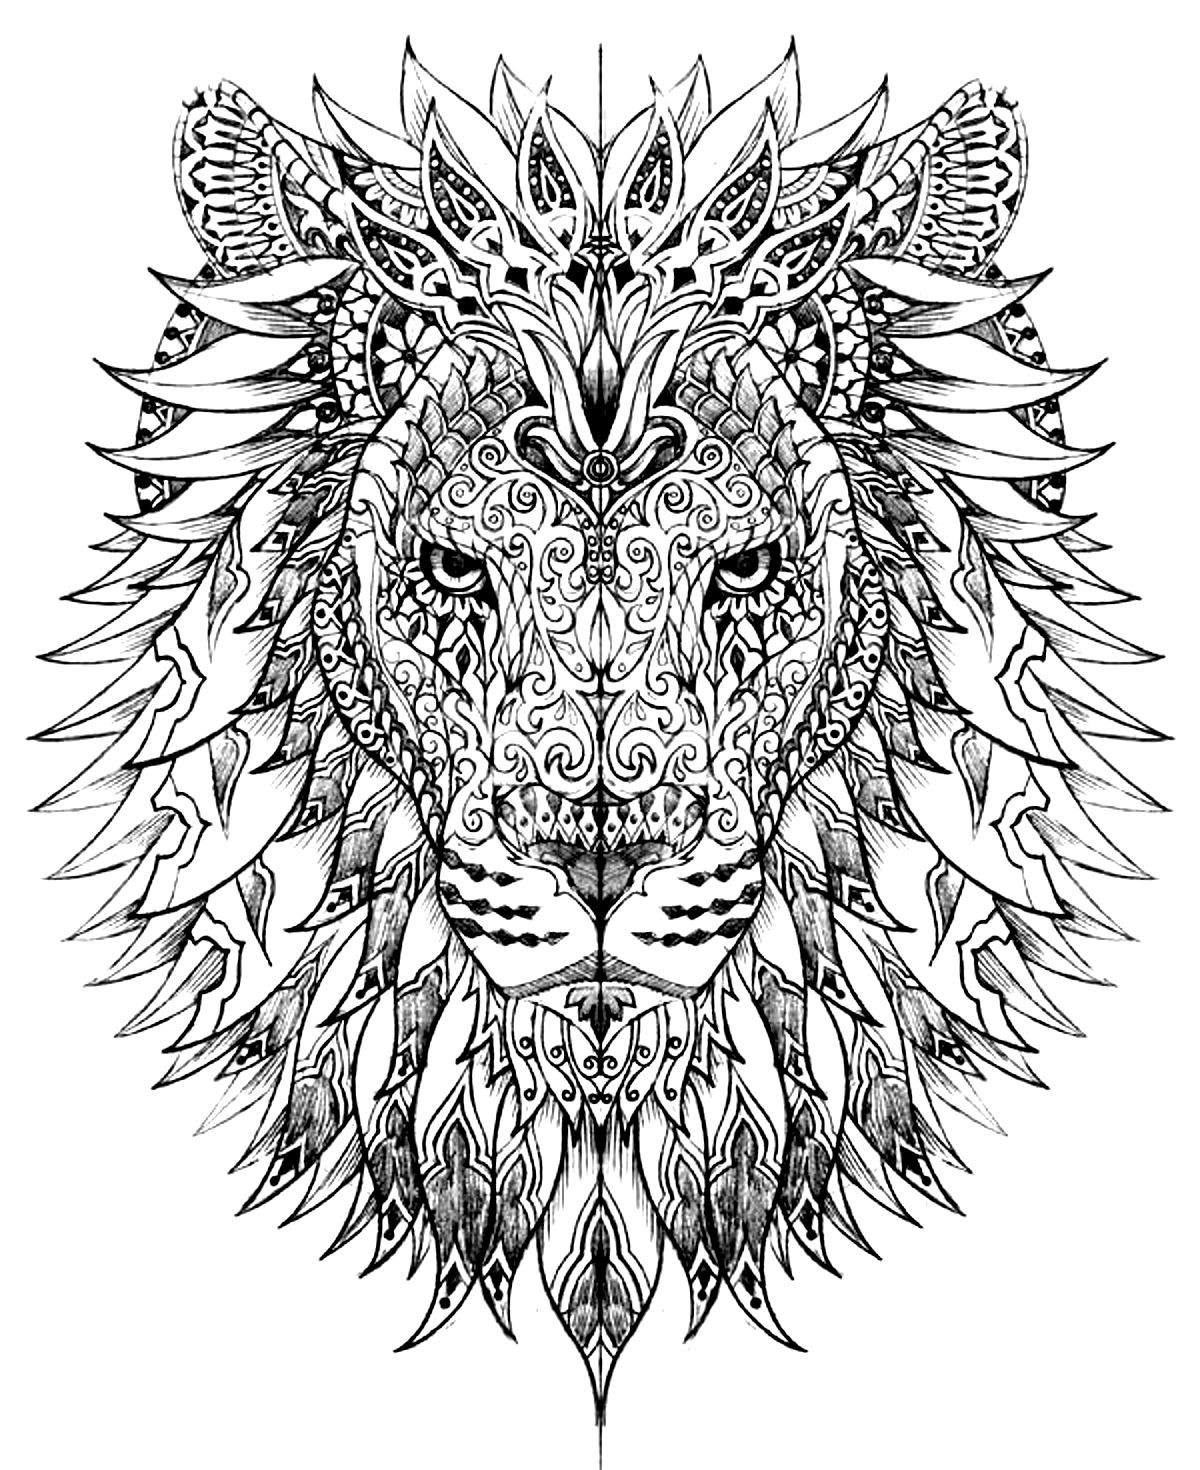 Hard Coloring Pages Printable
 Hard Coloring Pages for Adults Best Coloring Pages For Kids